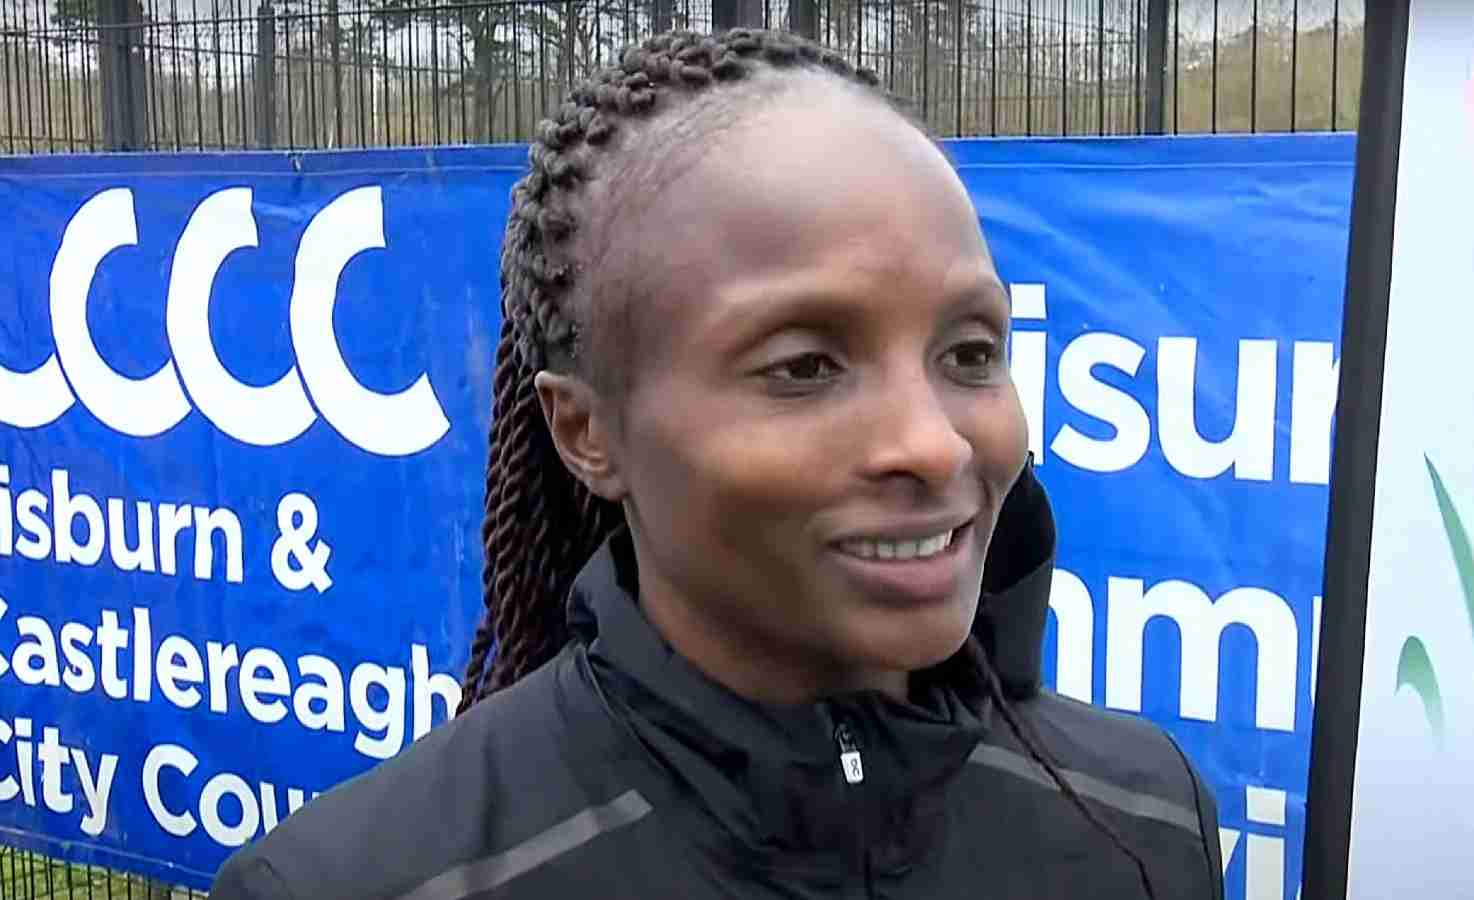 Results from the Northern Ireland International Cross Country; Hellen Obiri cruises to win